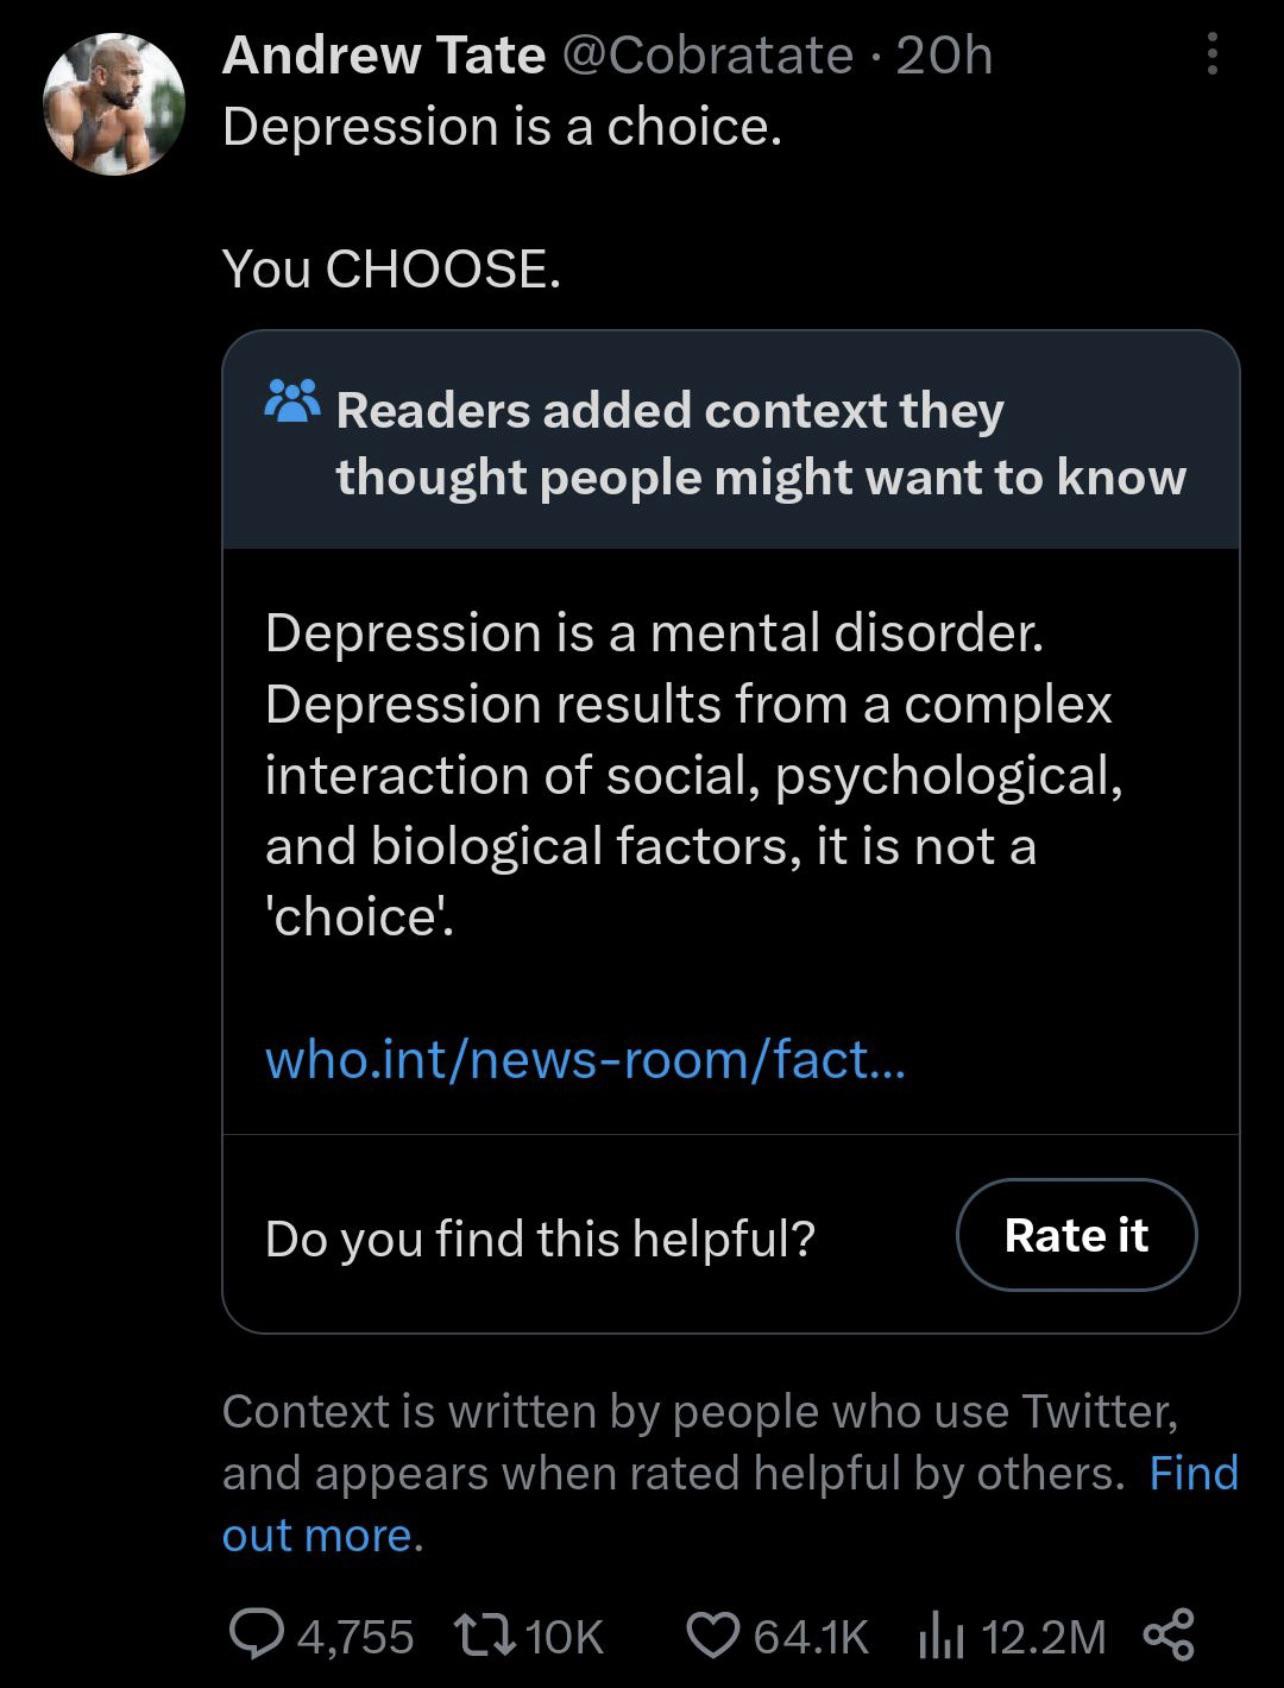 reddit facepalm - screenshot - Andrew Tate 20h Depression is a choice. You Choose. Readers added context they thought people might want to know Depression is a mental disorder. Depression results from a complex interaction of social, psychological, and bi